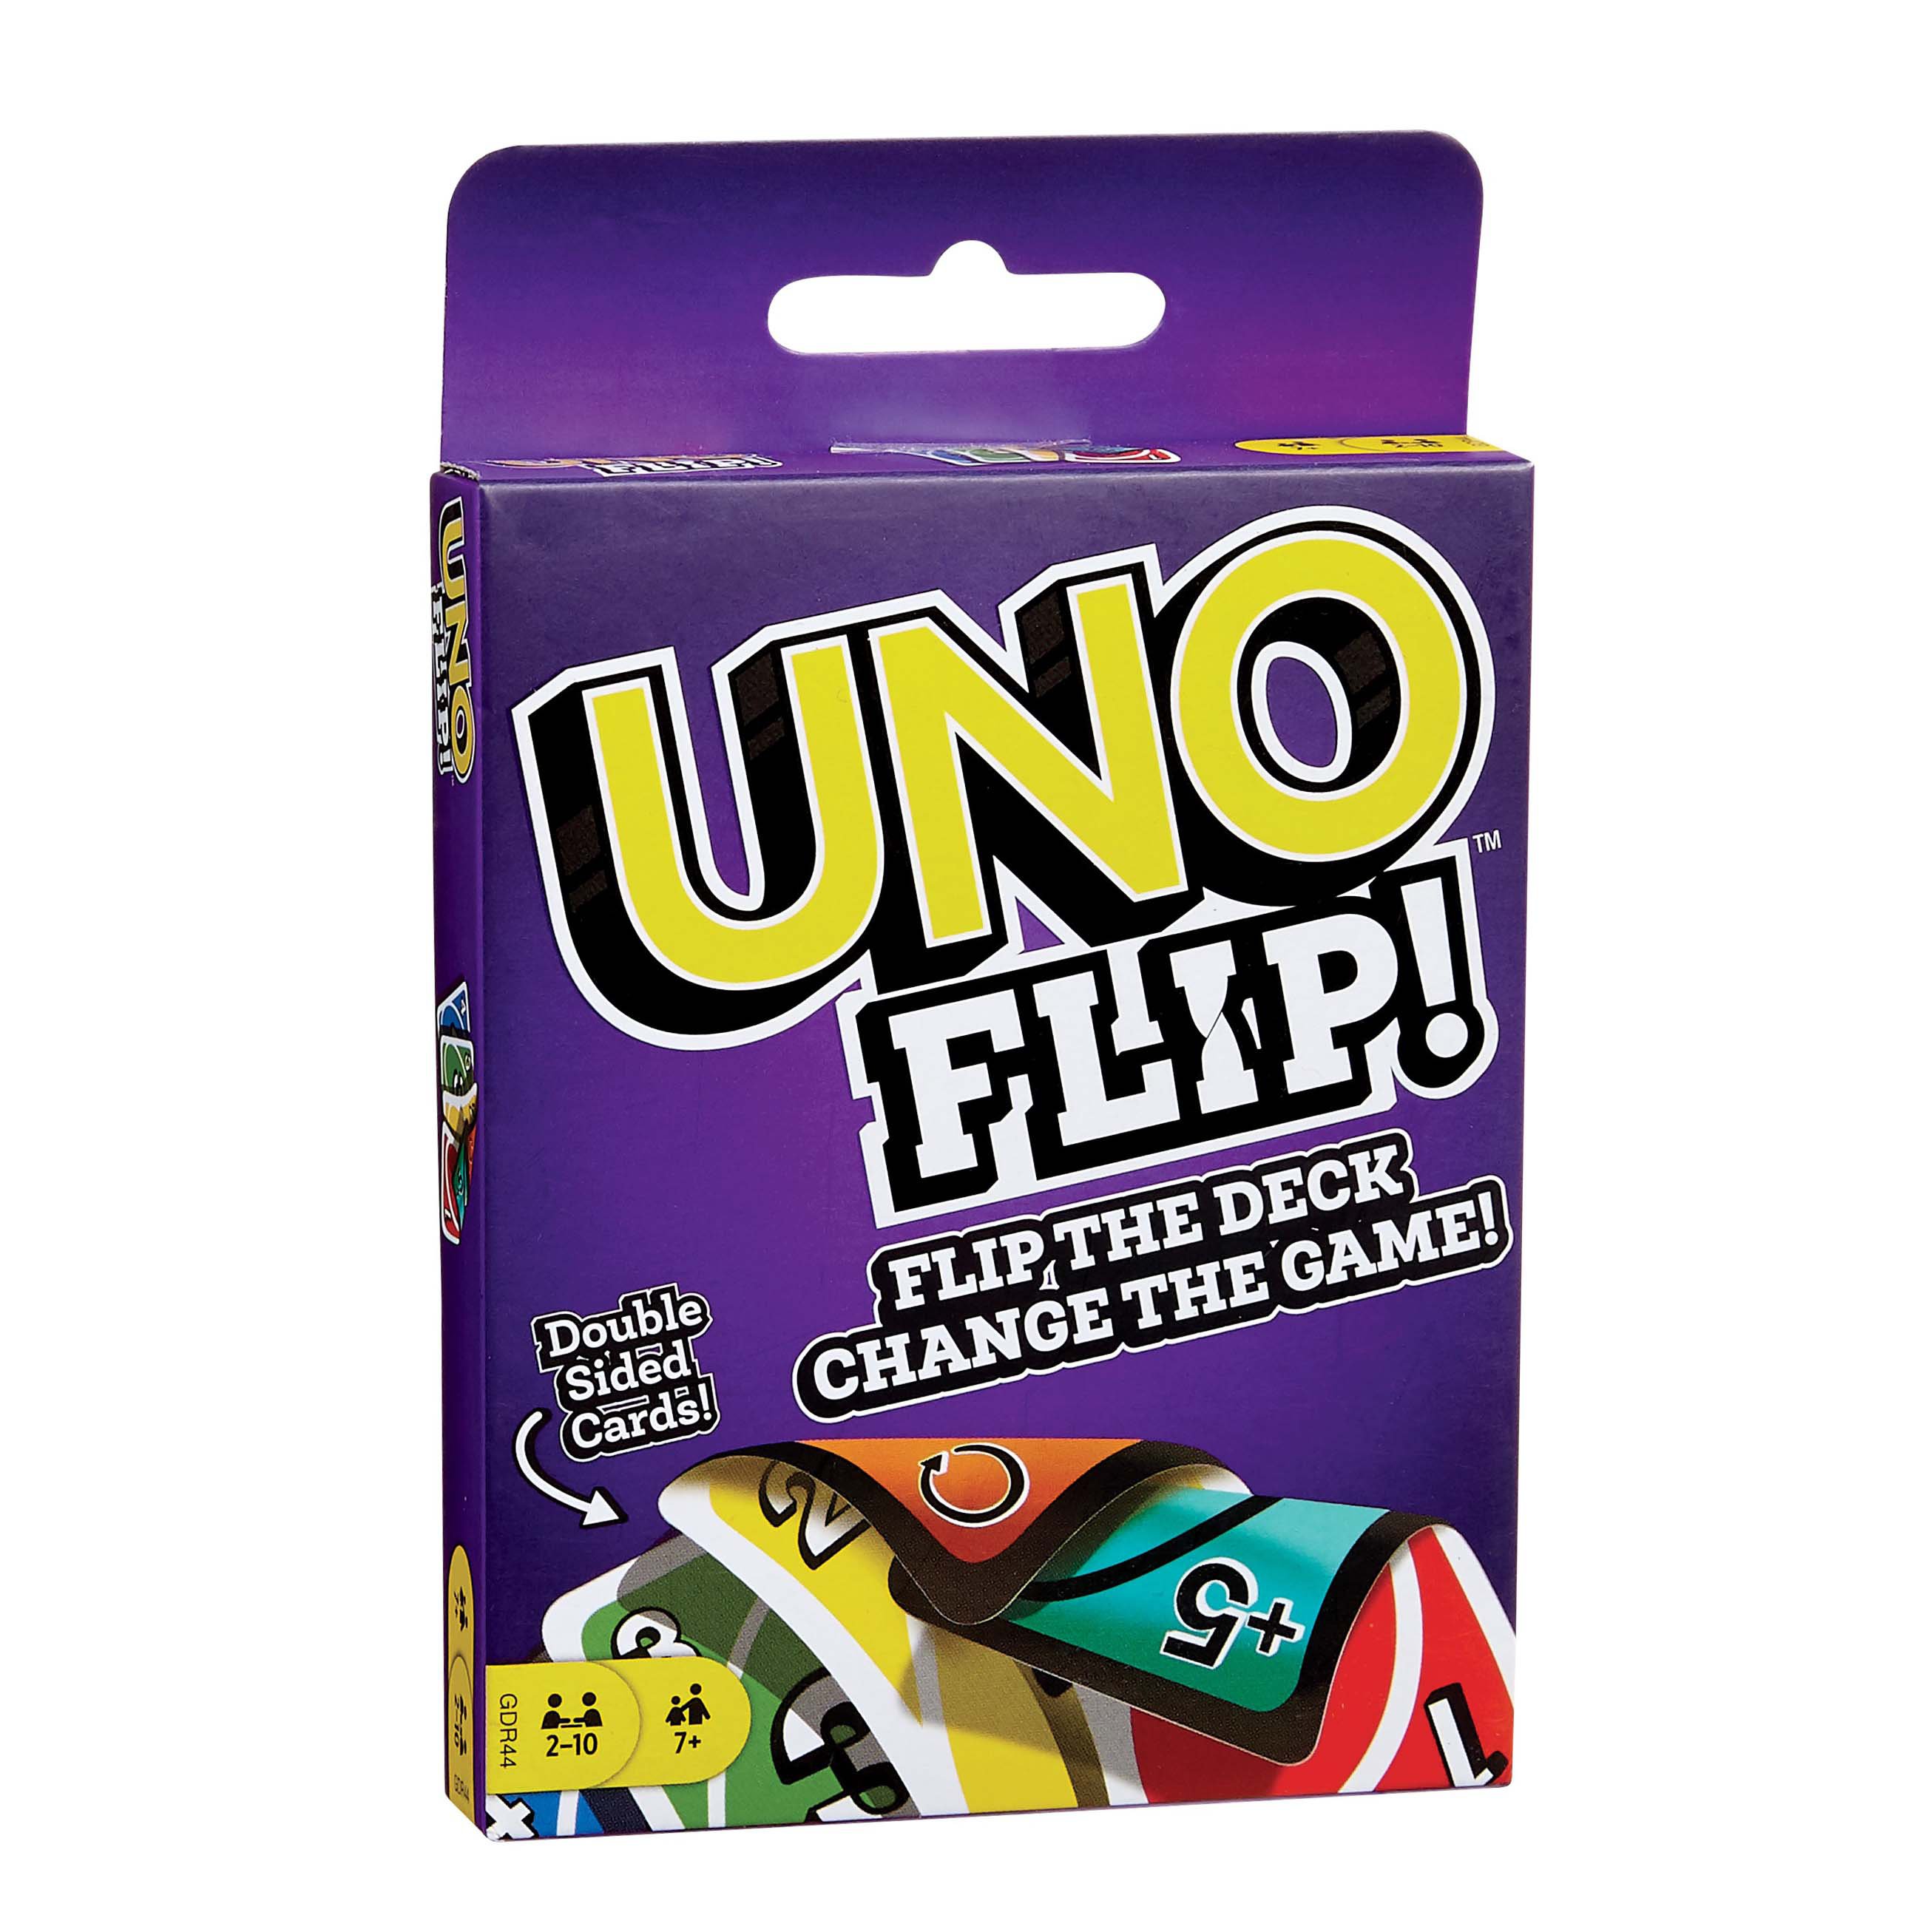 Mattel UNO Flip The Deck  Double Sided Card Game for 2-10 Players Ages 7Y New 